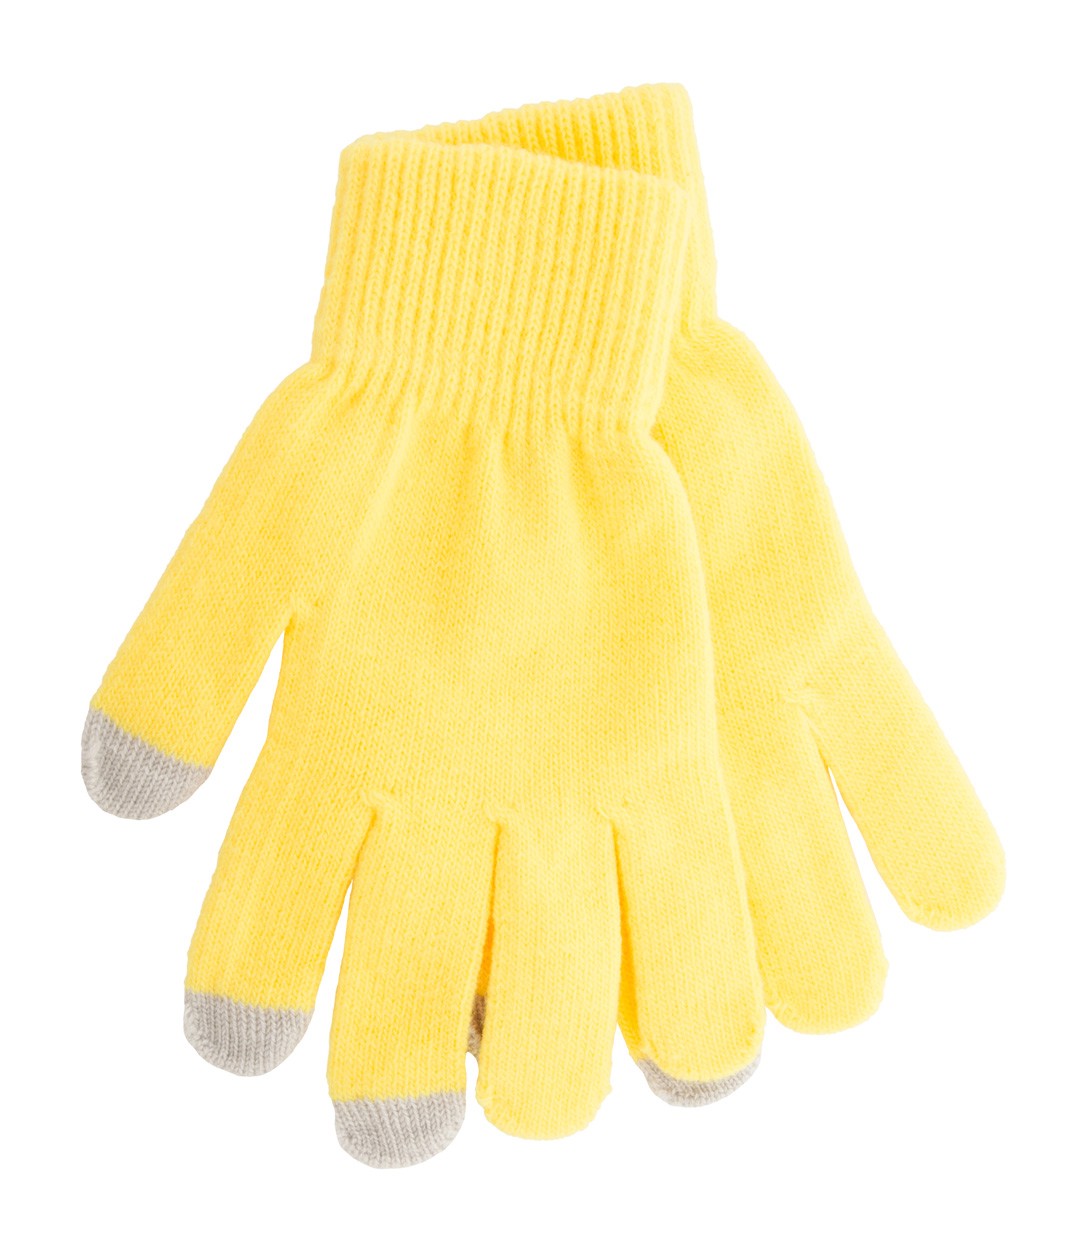 Touch Screen Gloves Actium - Yellow / Grey